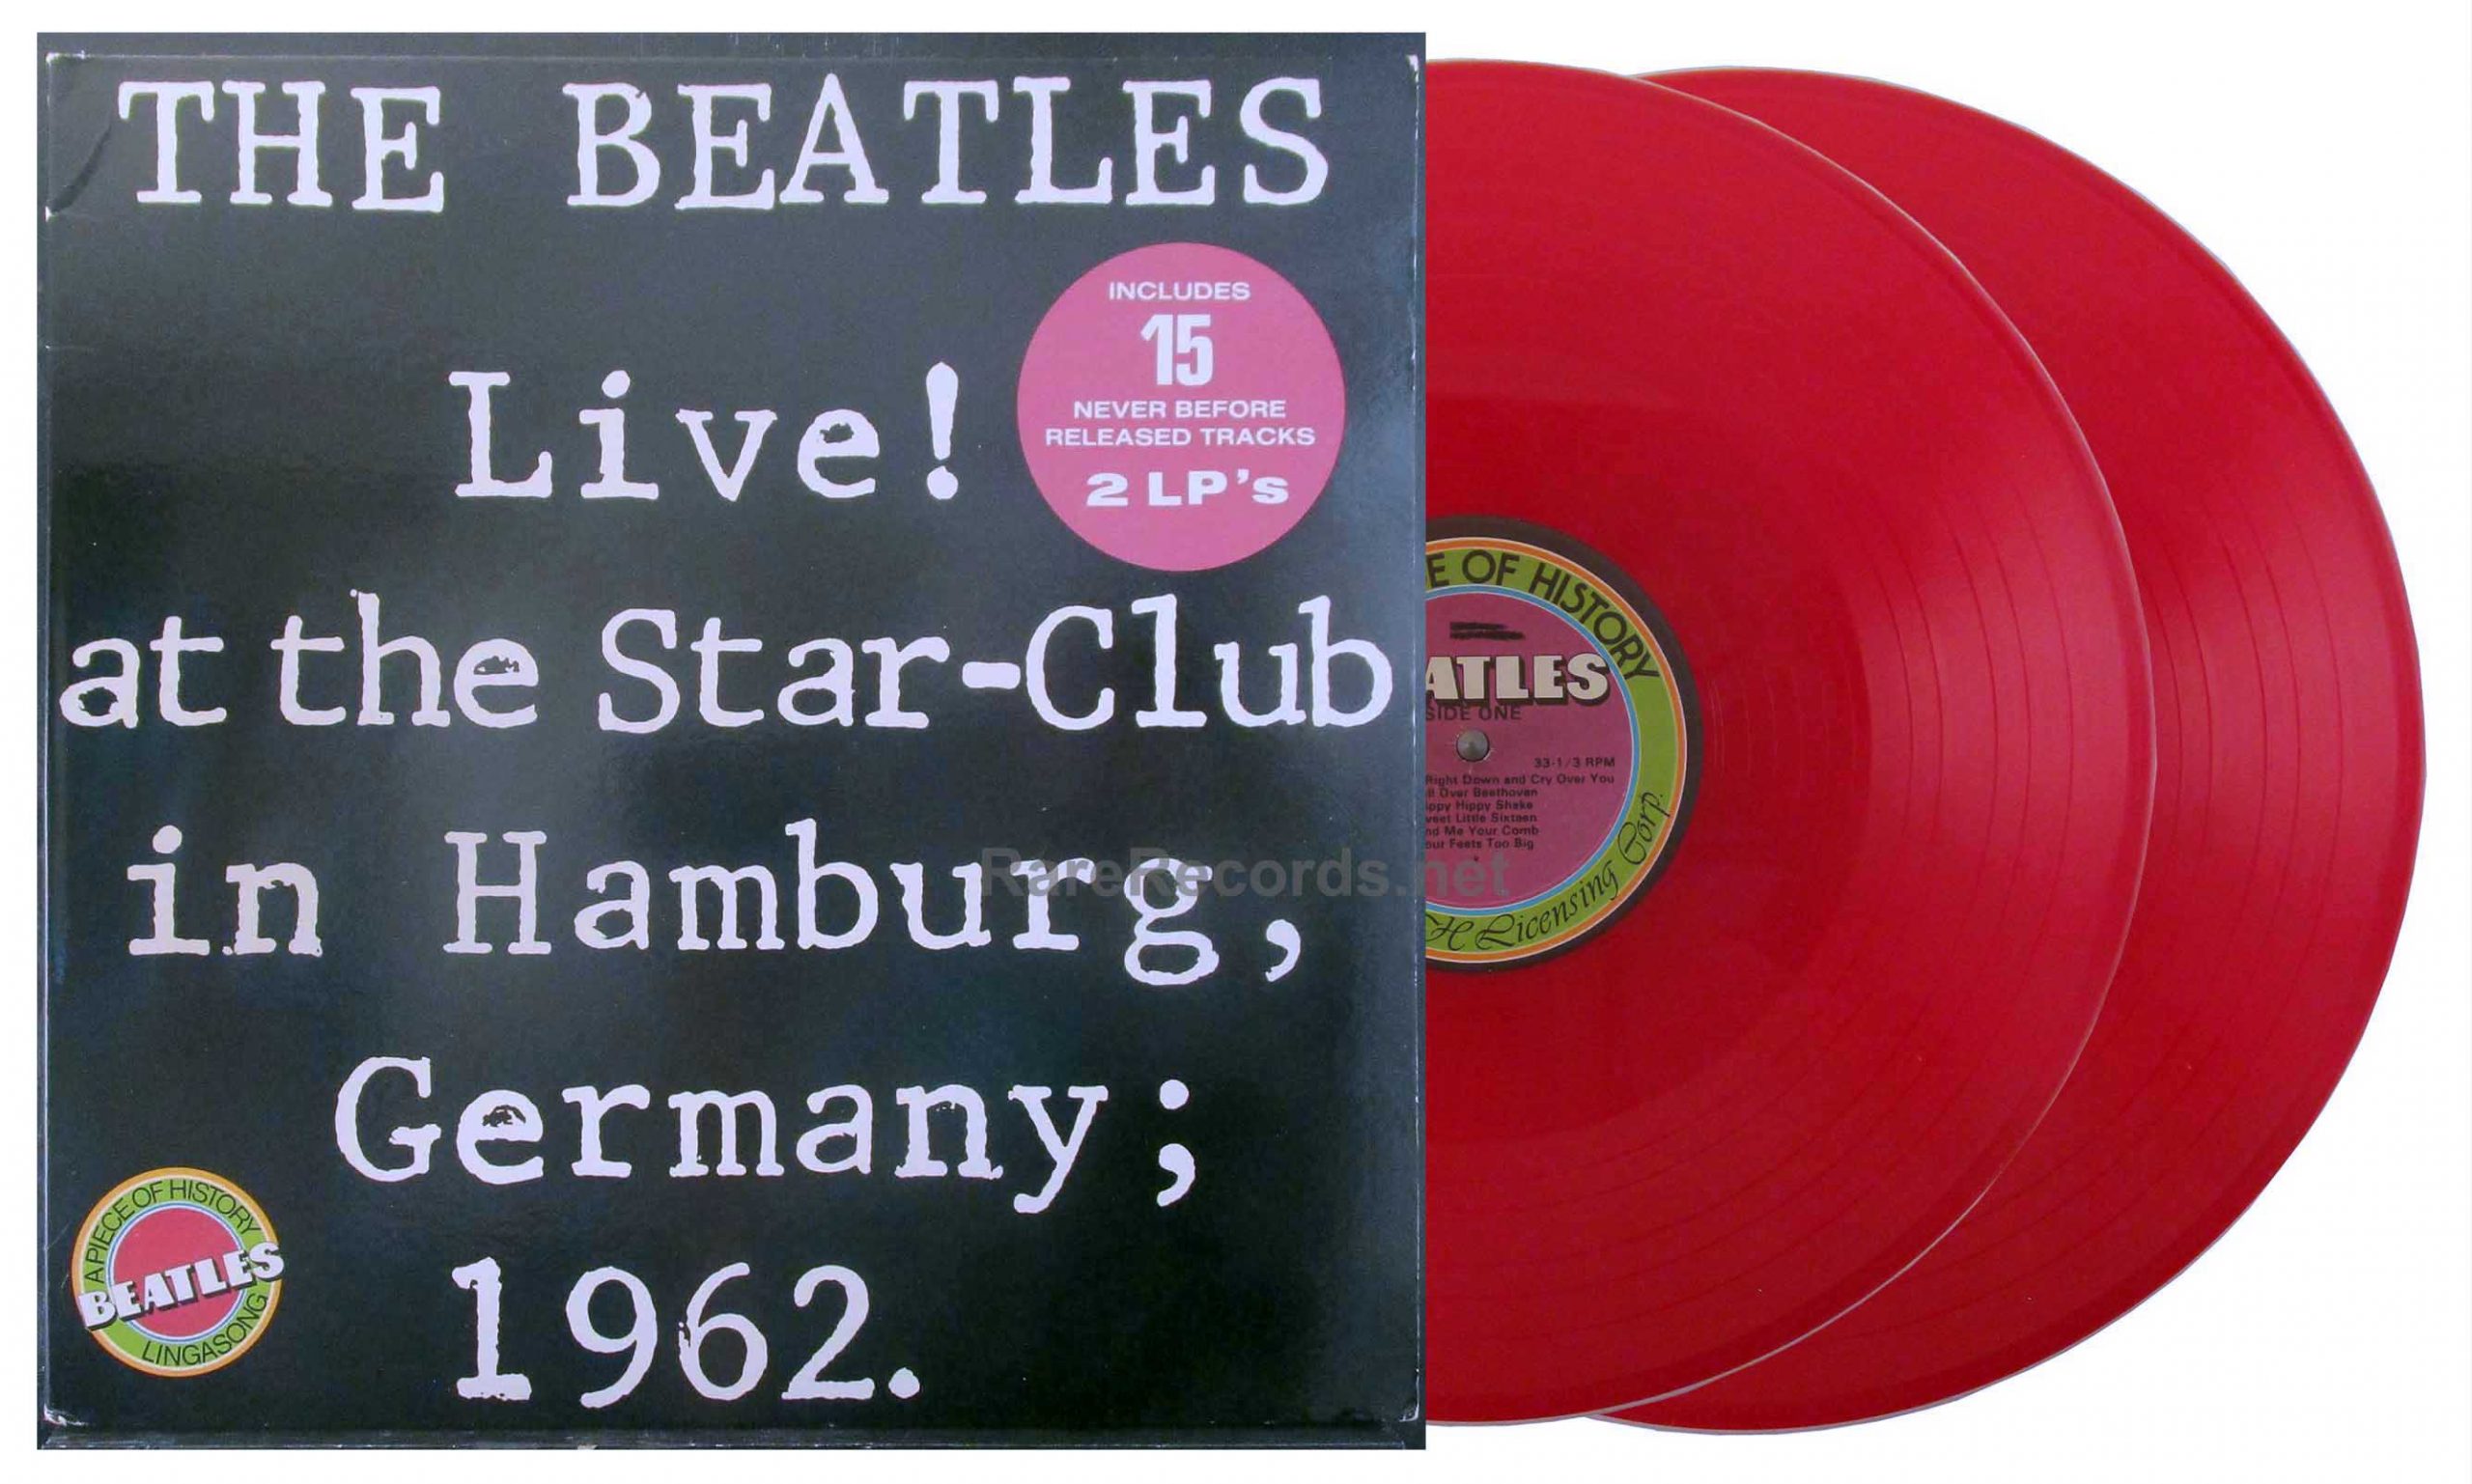 https://www.rarerecords.net/wp-content/uploads/beatles_star_club_red8-scaled.jpg